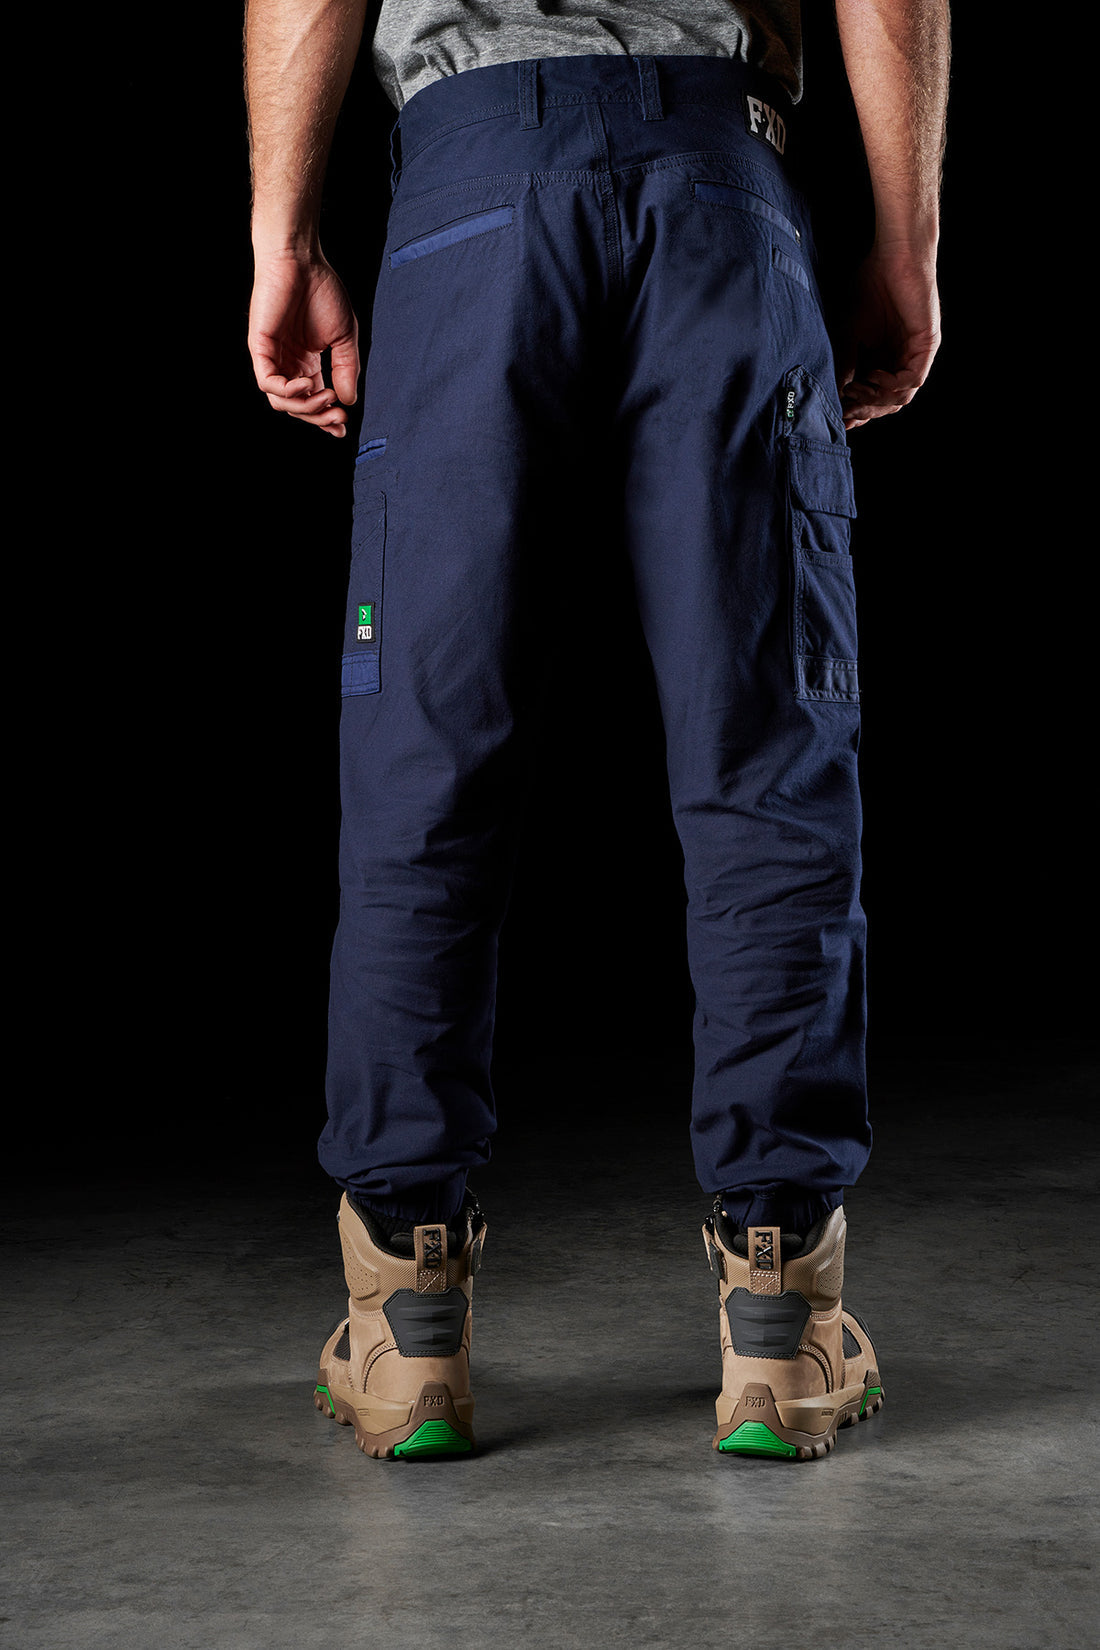 FXD WP4 CUFFED STRETCH WORK PANTS NAVY